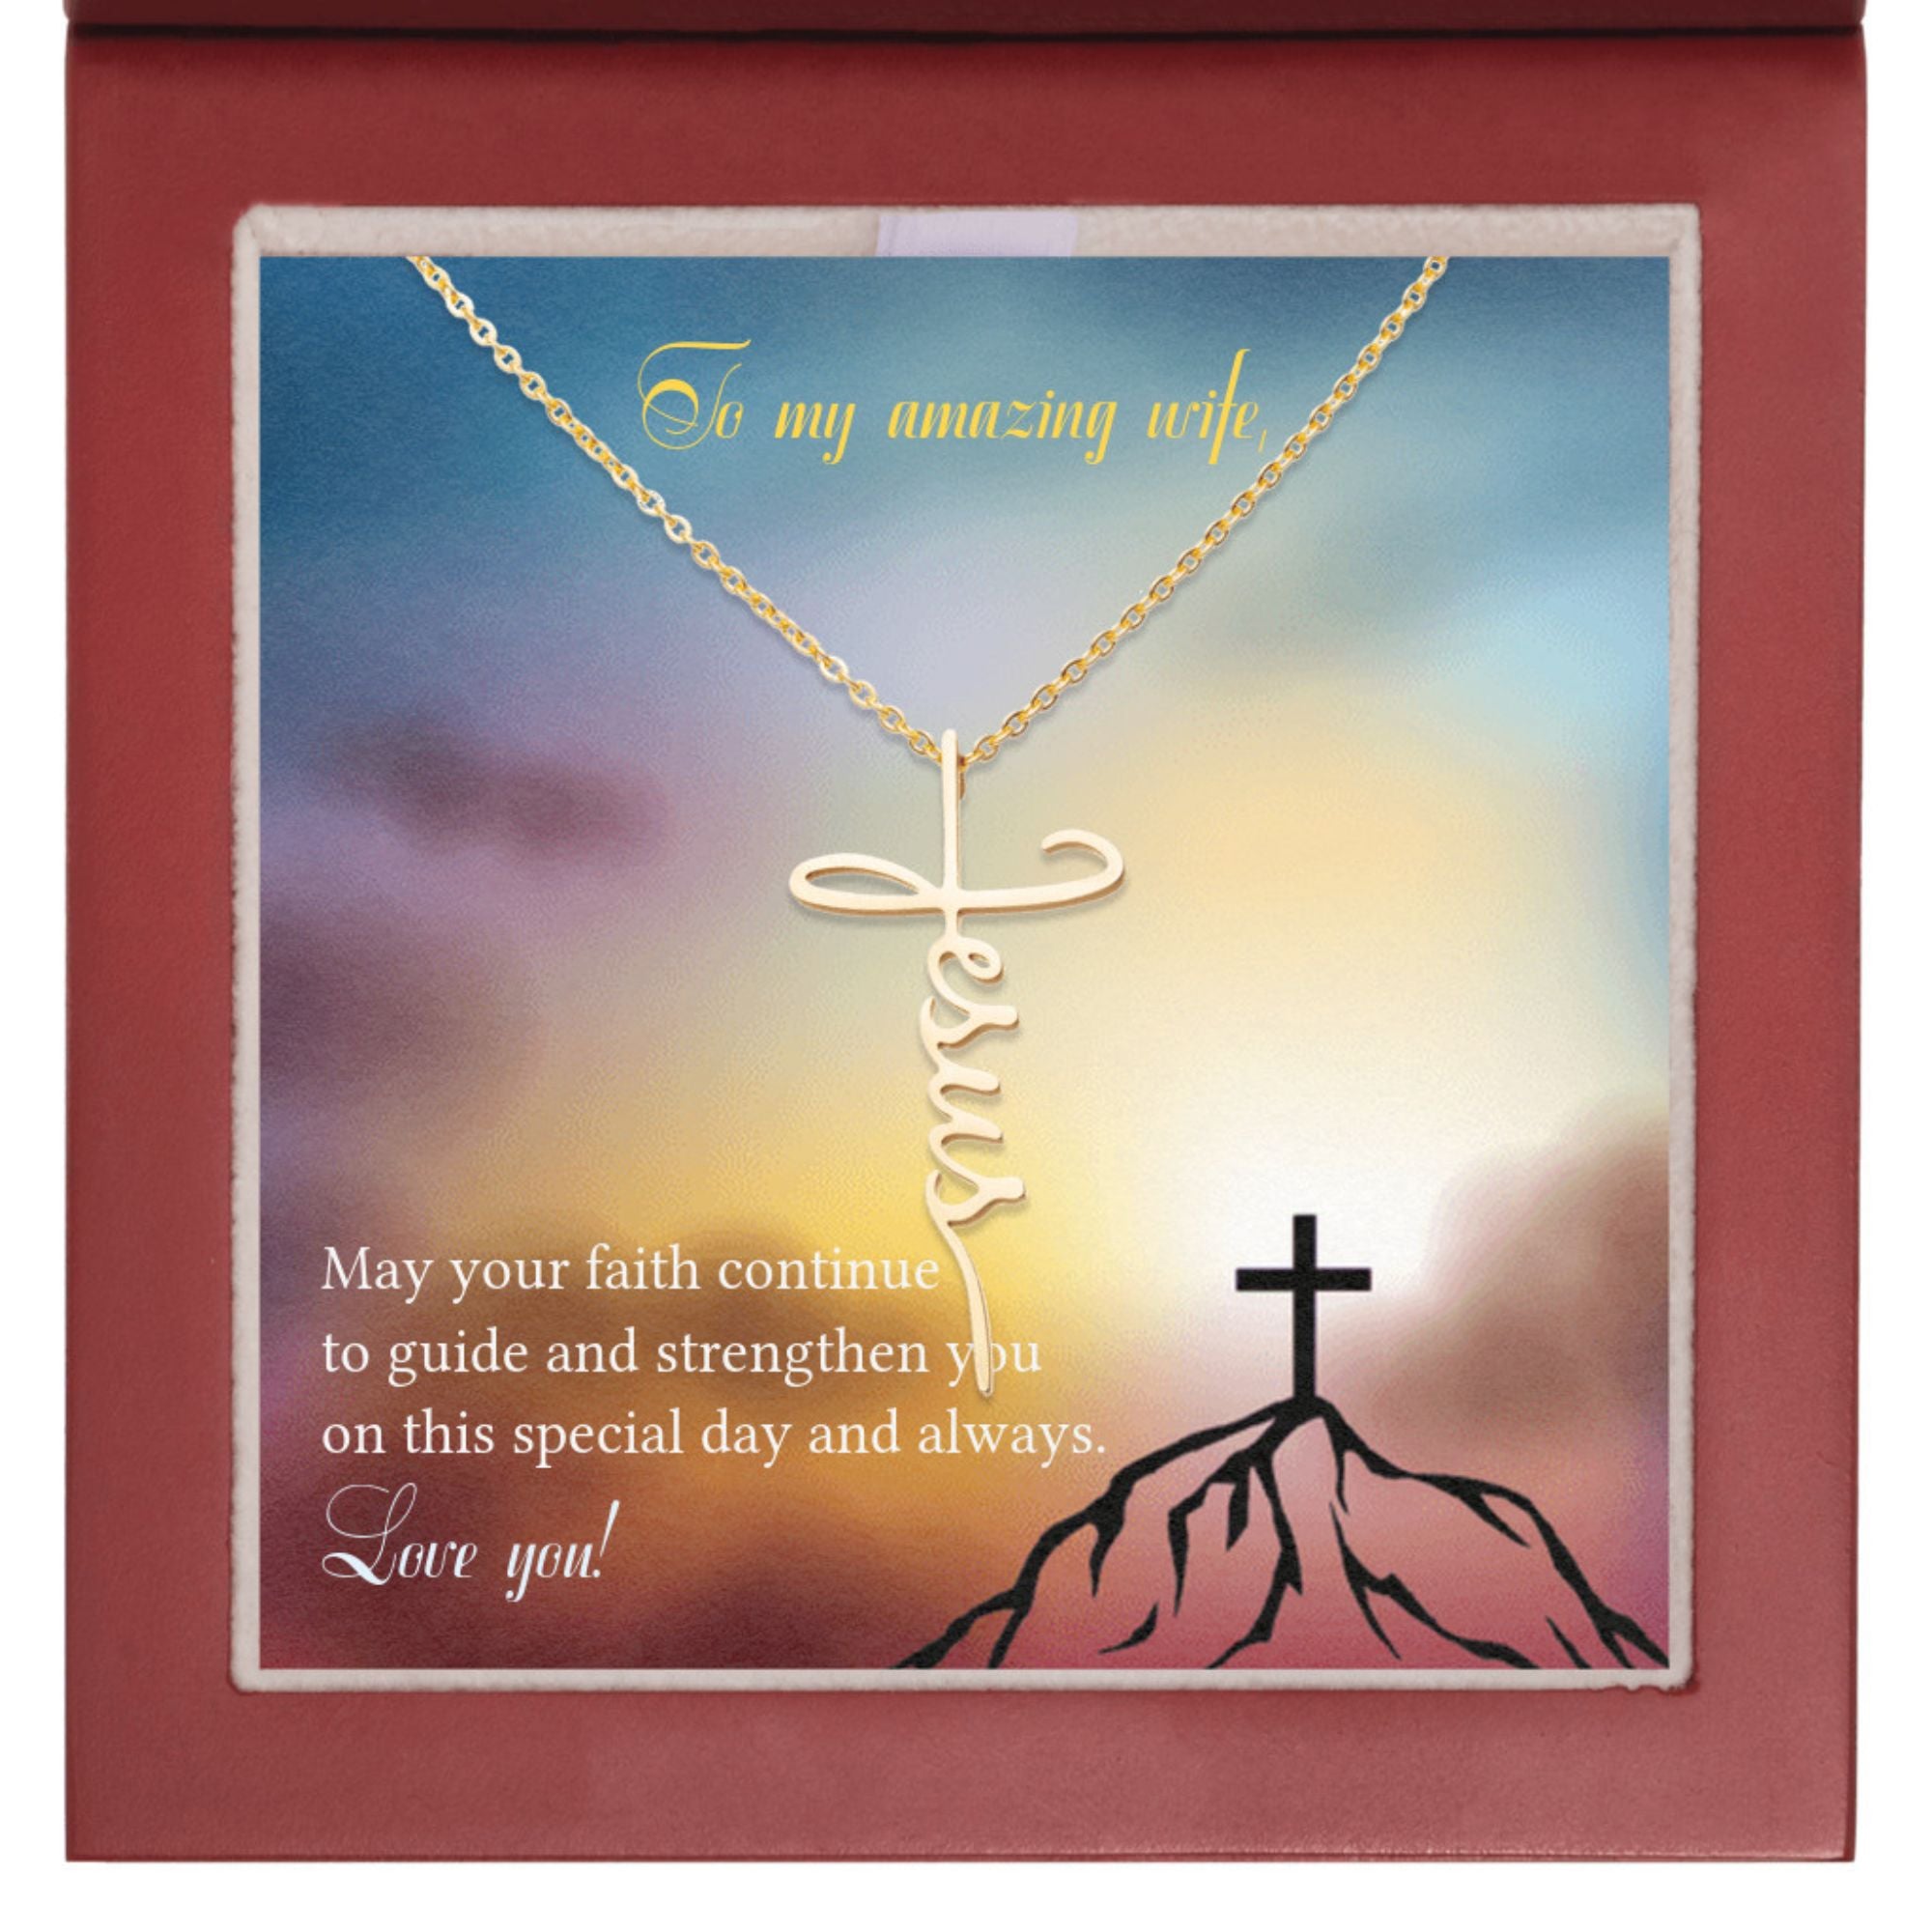 My Amazing Wife - I Am the Way - Jesus Cross Necklace Box Type: LED Box Finish: 18K Gold Plated Jesus Passion Apparel